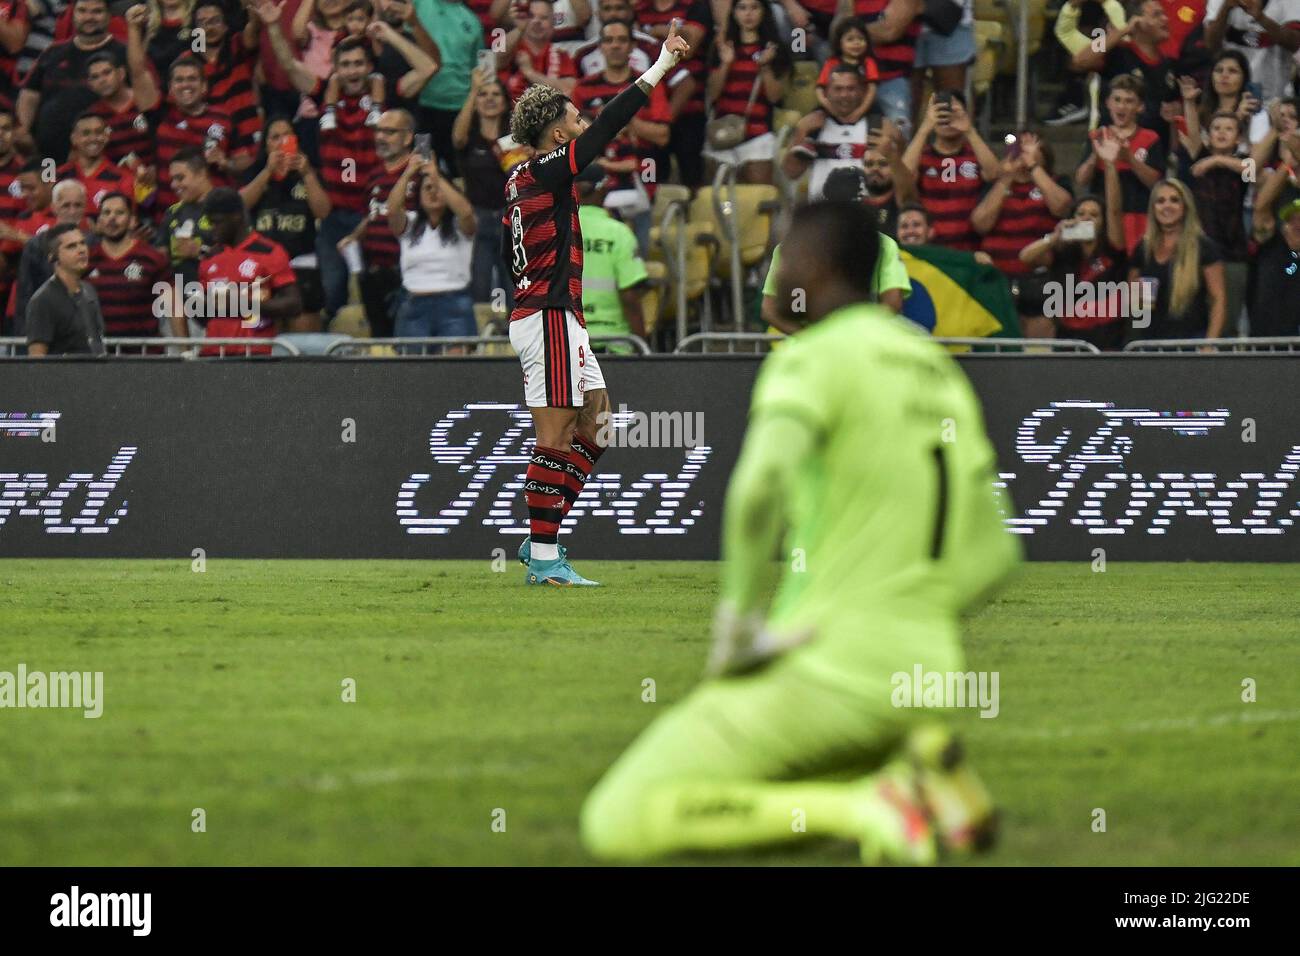 Rio De Janeiro, Brazil. 06th July, 2022. Gabriel Barbosa do Flamengo celebrates his goal during the match between Flamengo and Tolima (COL), for the round of 16 of the Copa Libertadores 2022, at the Maracana Stadium this Wednesday 06. 30761 (Marcello Dias/SPP) Credit: SPP Sport Press Photo. /Alamy Live News Stock Photo